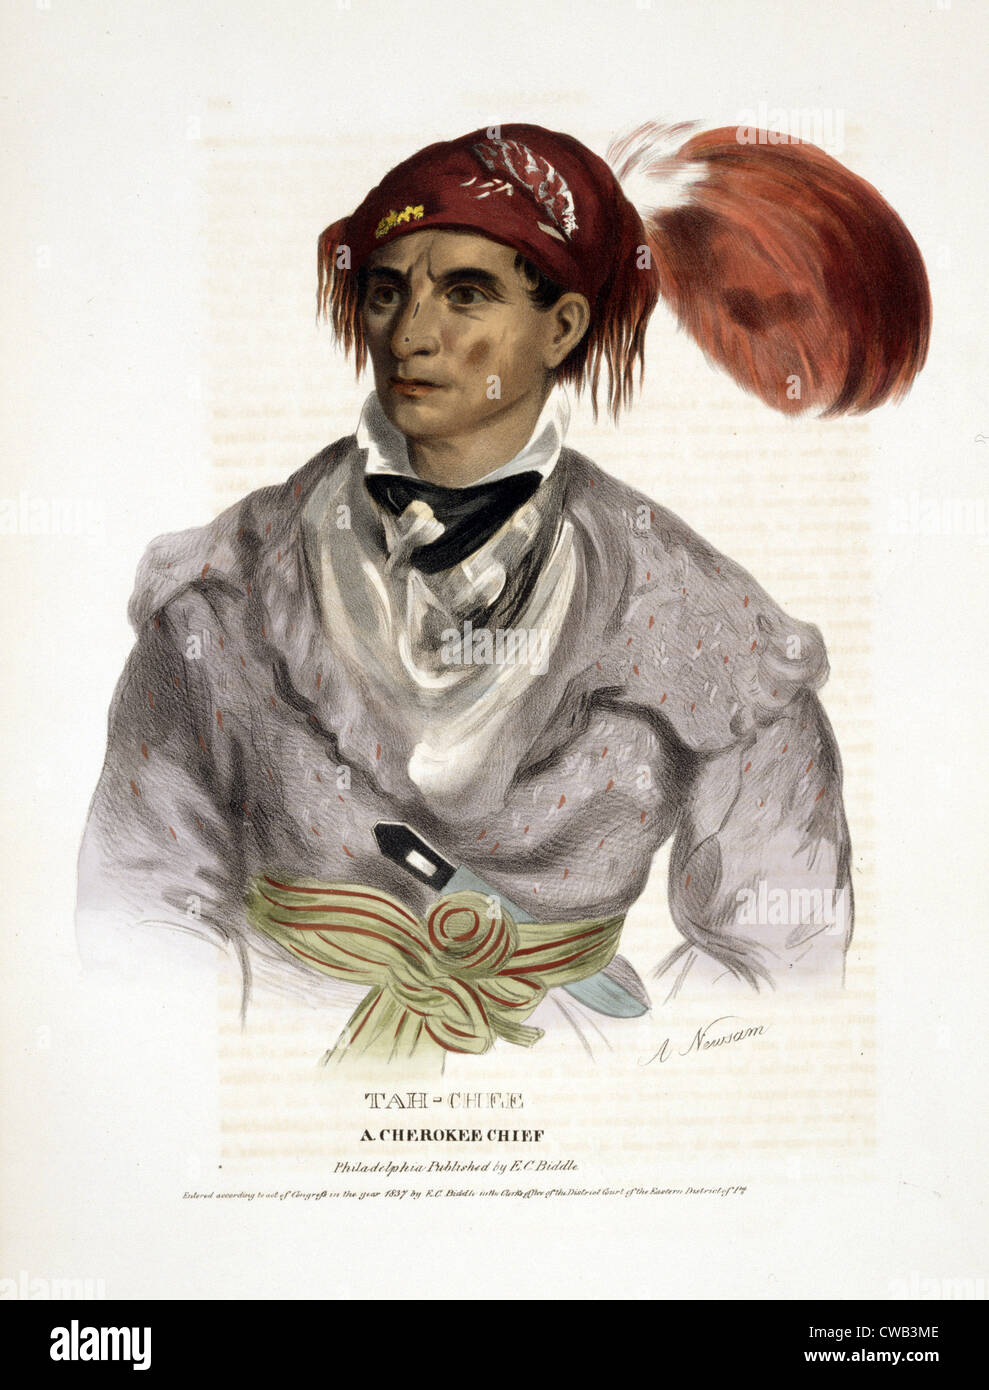 Cherokee Tribe. Tah-chee, a Cherokee chief. Hand-colored lithograph copy of a portrait painted by Albert Newsam. 1837 Stock Photo